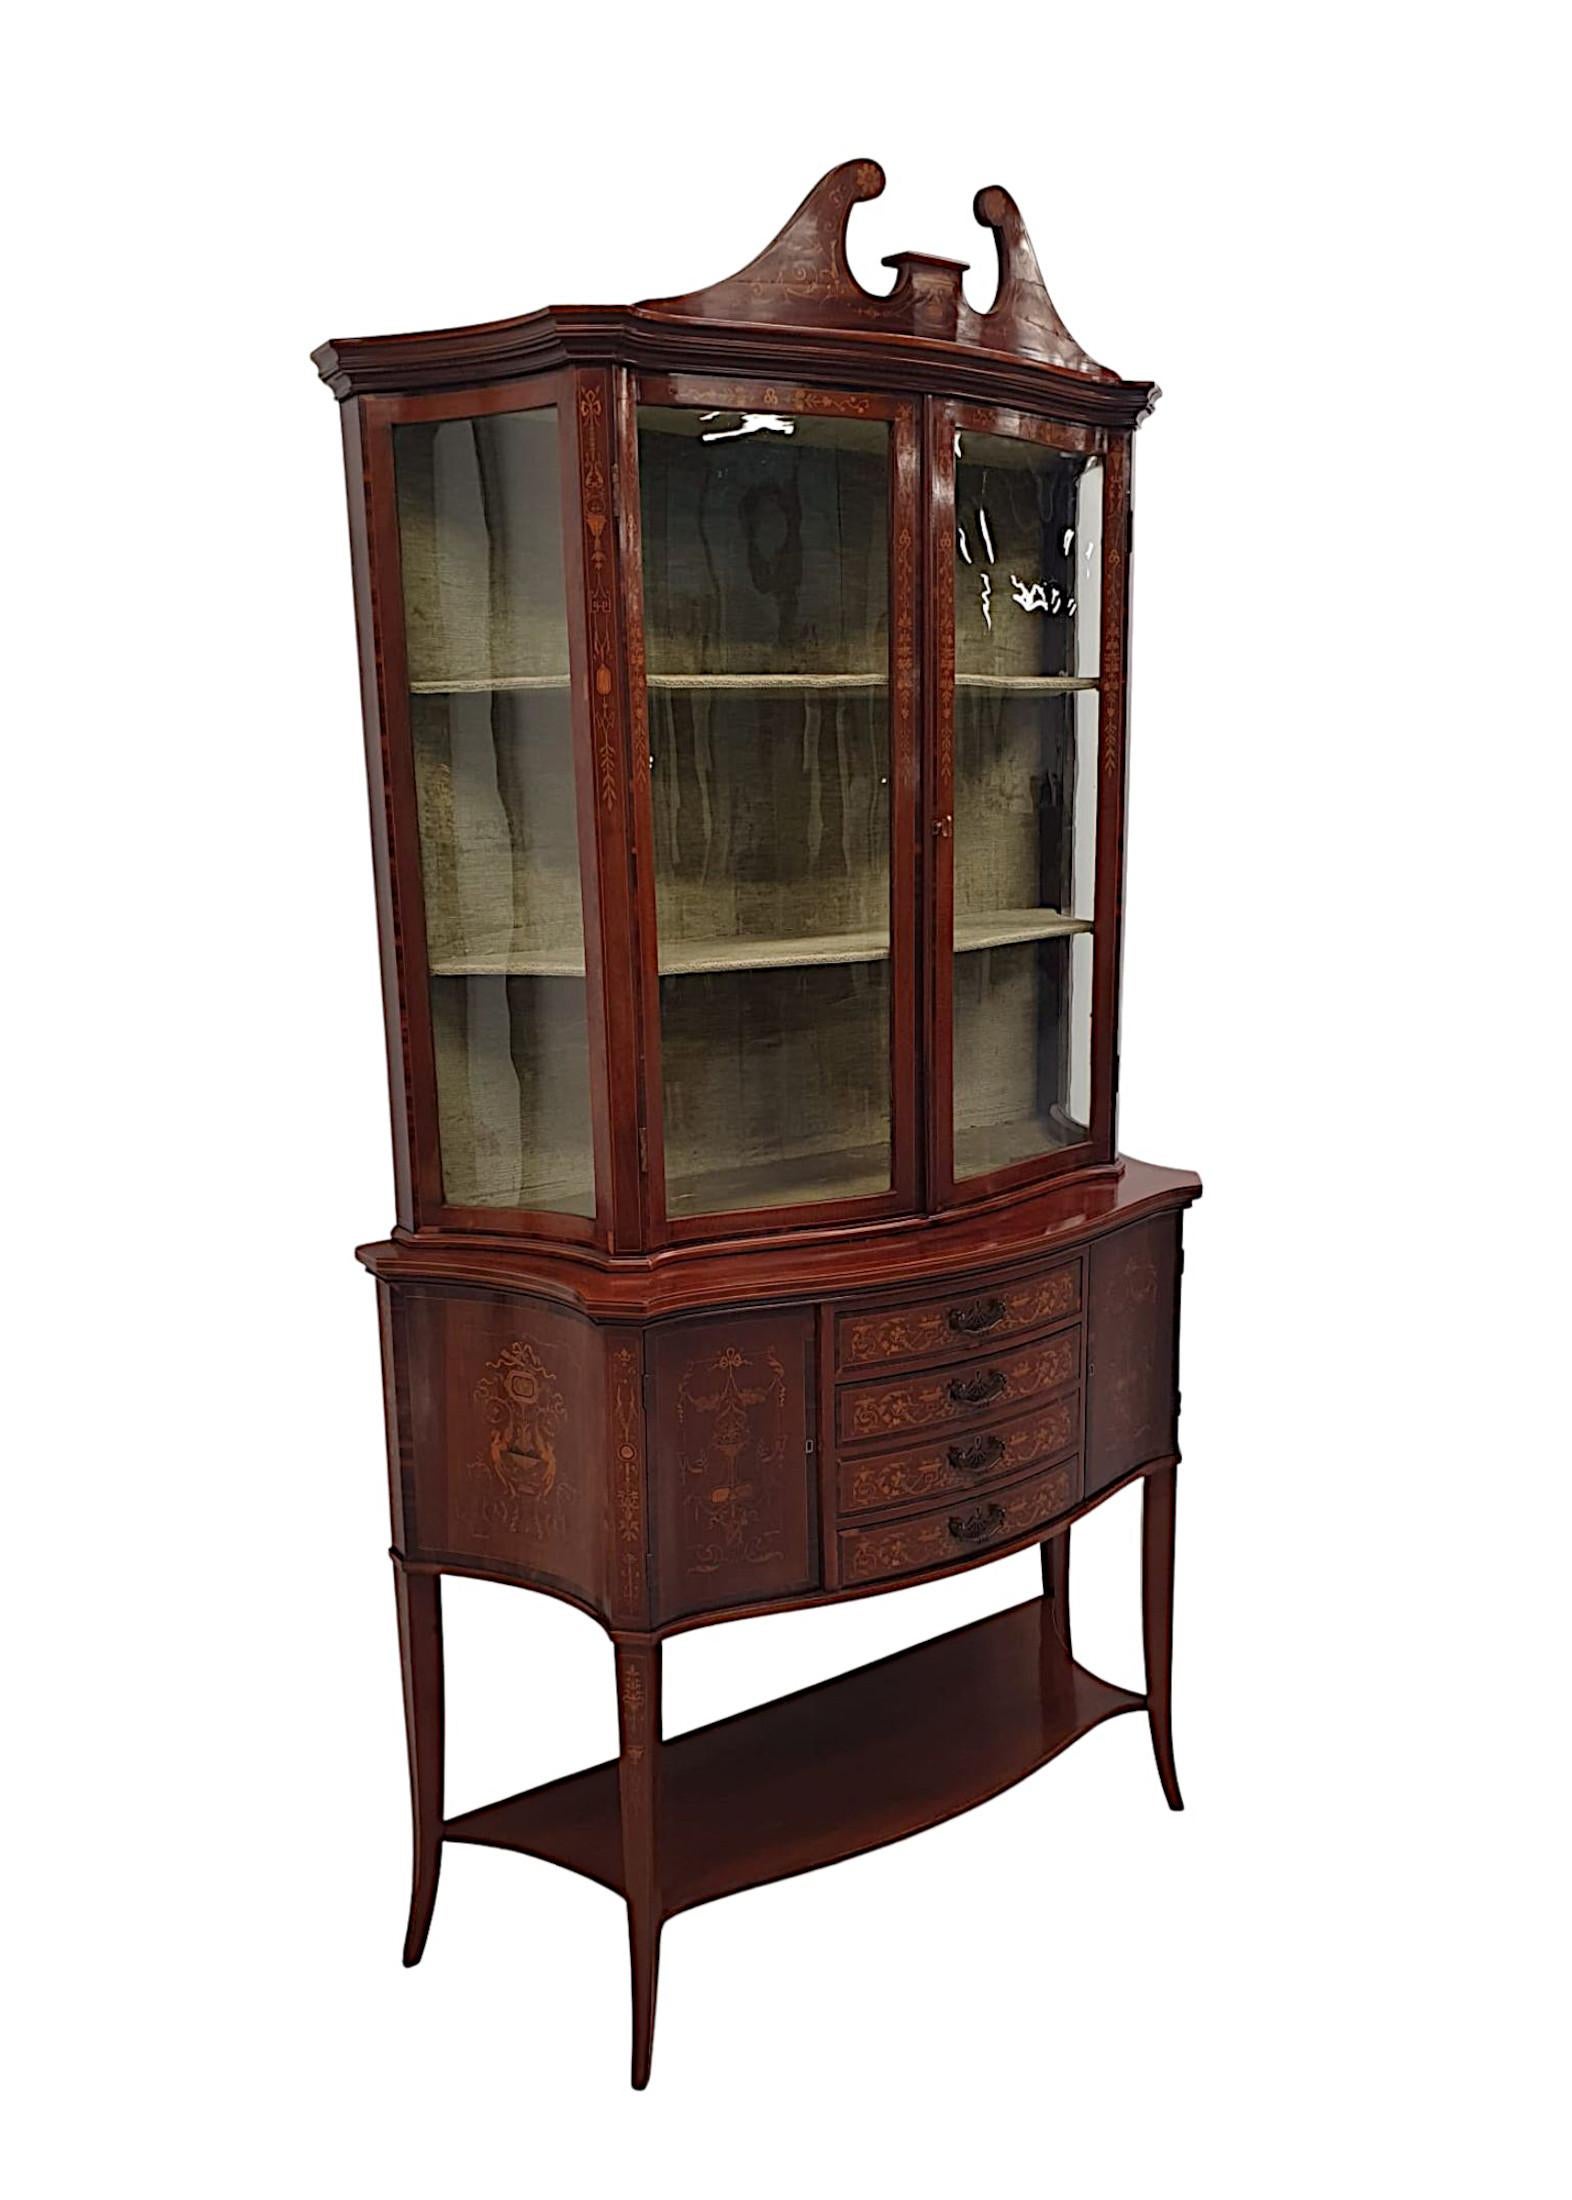 An exceptional Edwardian mahogany display case attributed to Edward and Roberts, London, with gorgeous patination, line inlaid and with exquisite marquetry detail depicting Neoclassical motifs of urns, ribboned swags of foliate, scrolls and